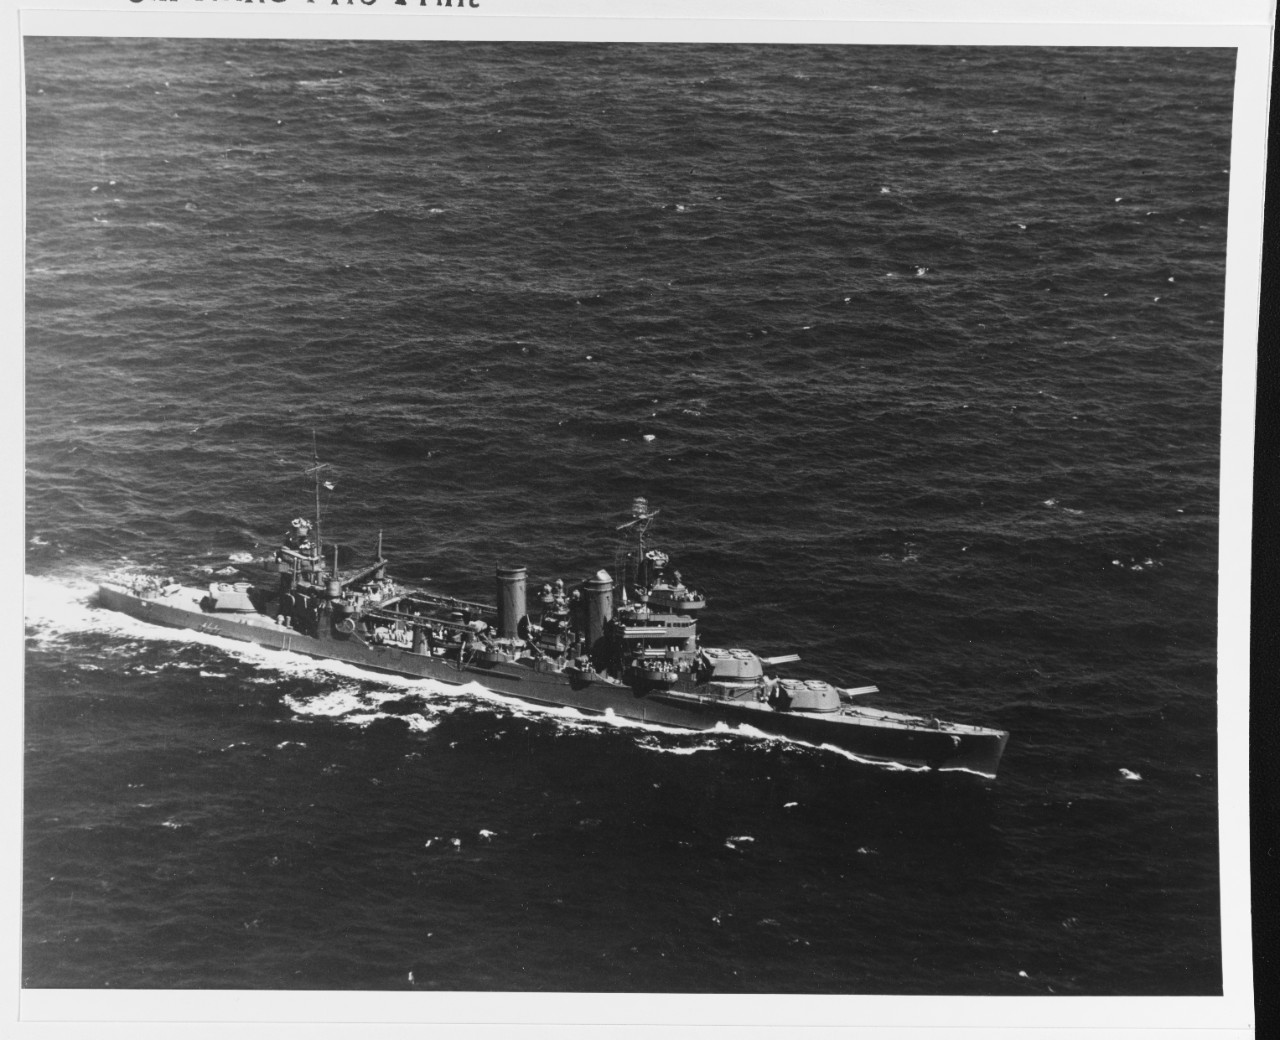 Photo #: 80-G-10115  USS New Orleans (CA-32)